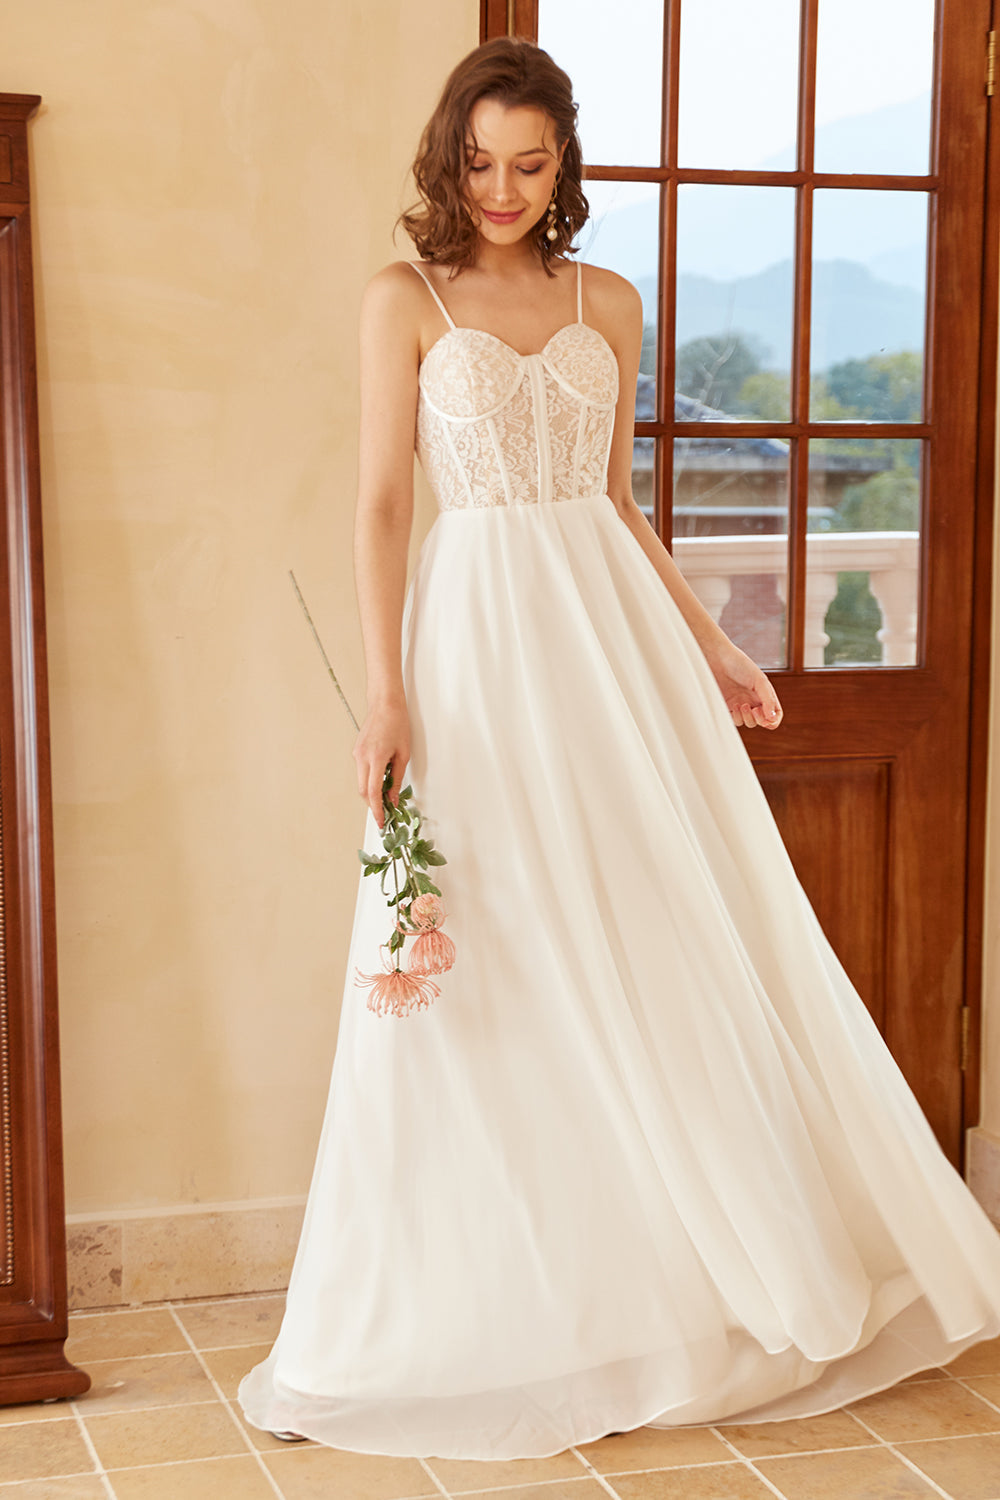 White Beautiful A Line Spaghetti Straps Floor-Length Wedding Dress with Appliques